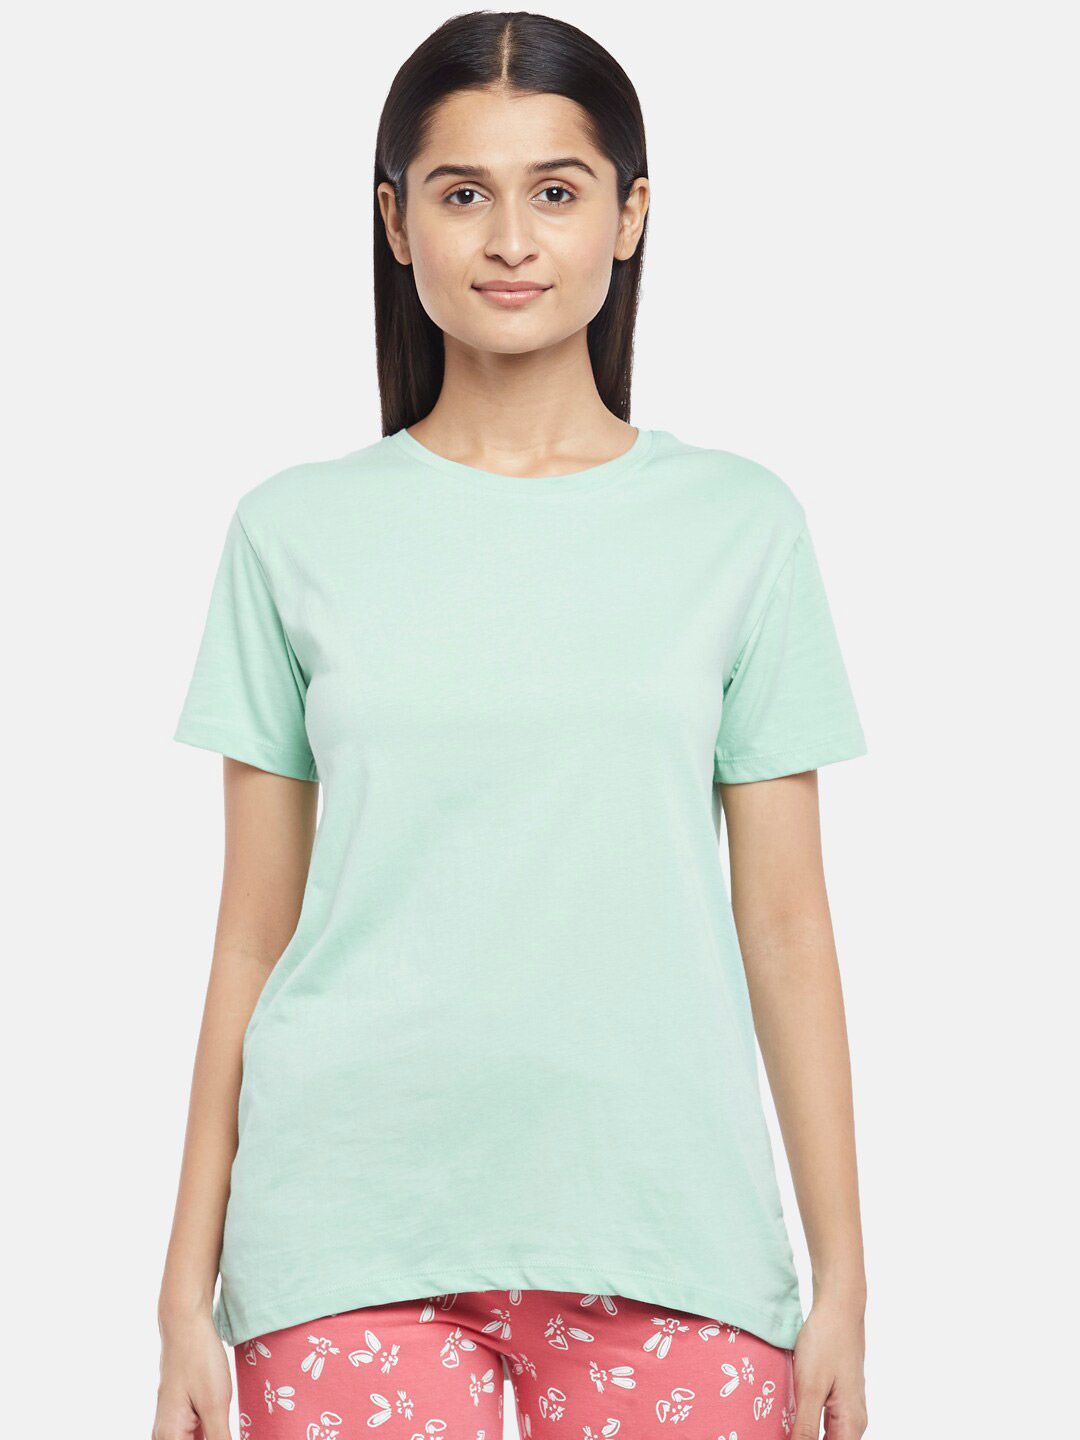 Dreamz by Pantaloons Women Sea Green Sports Extended Sleeves Lounge T-shirt Price in India